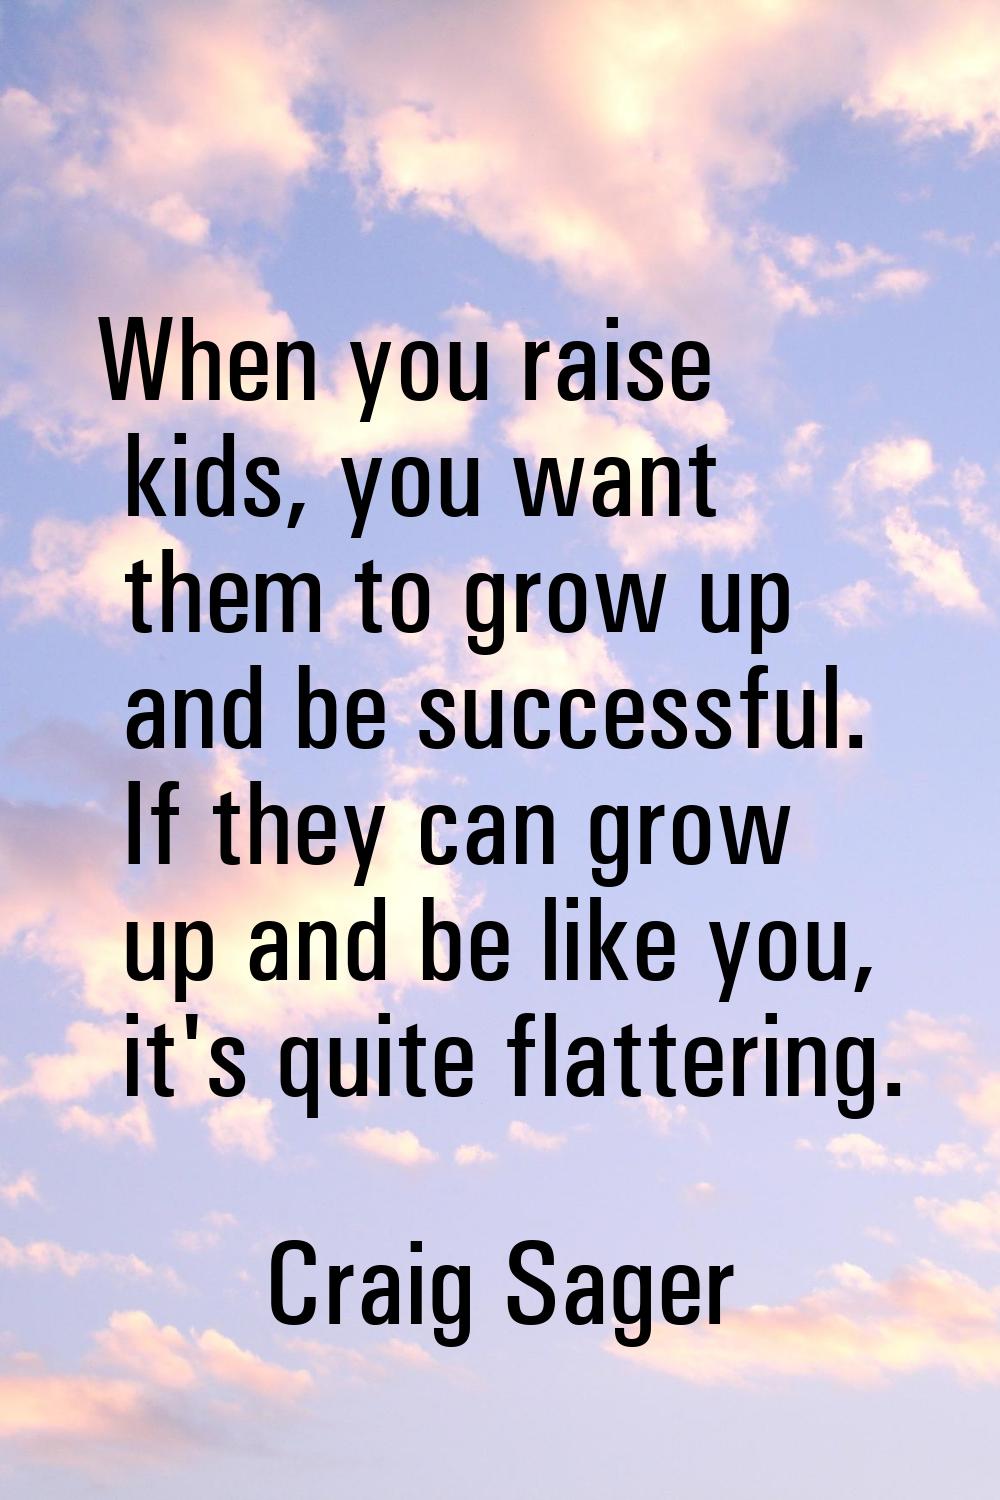 When you raise kids, you want them to grow up and be successful. If they can grow up and be like yo